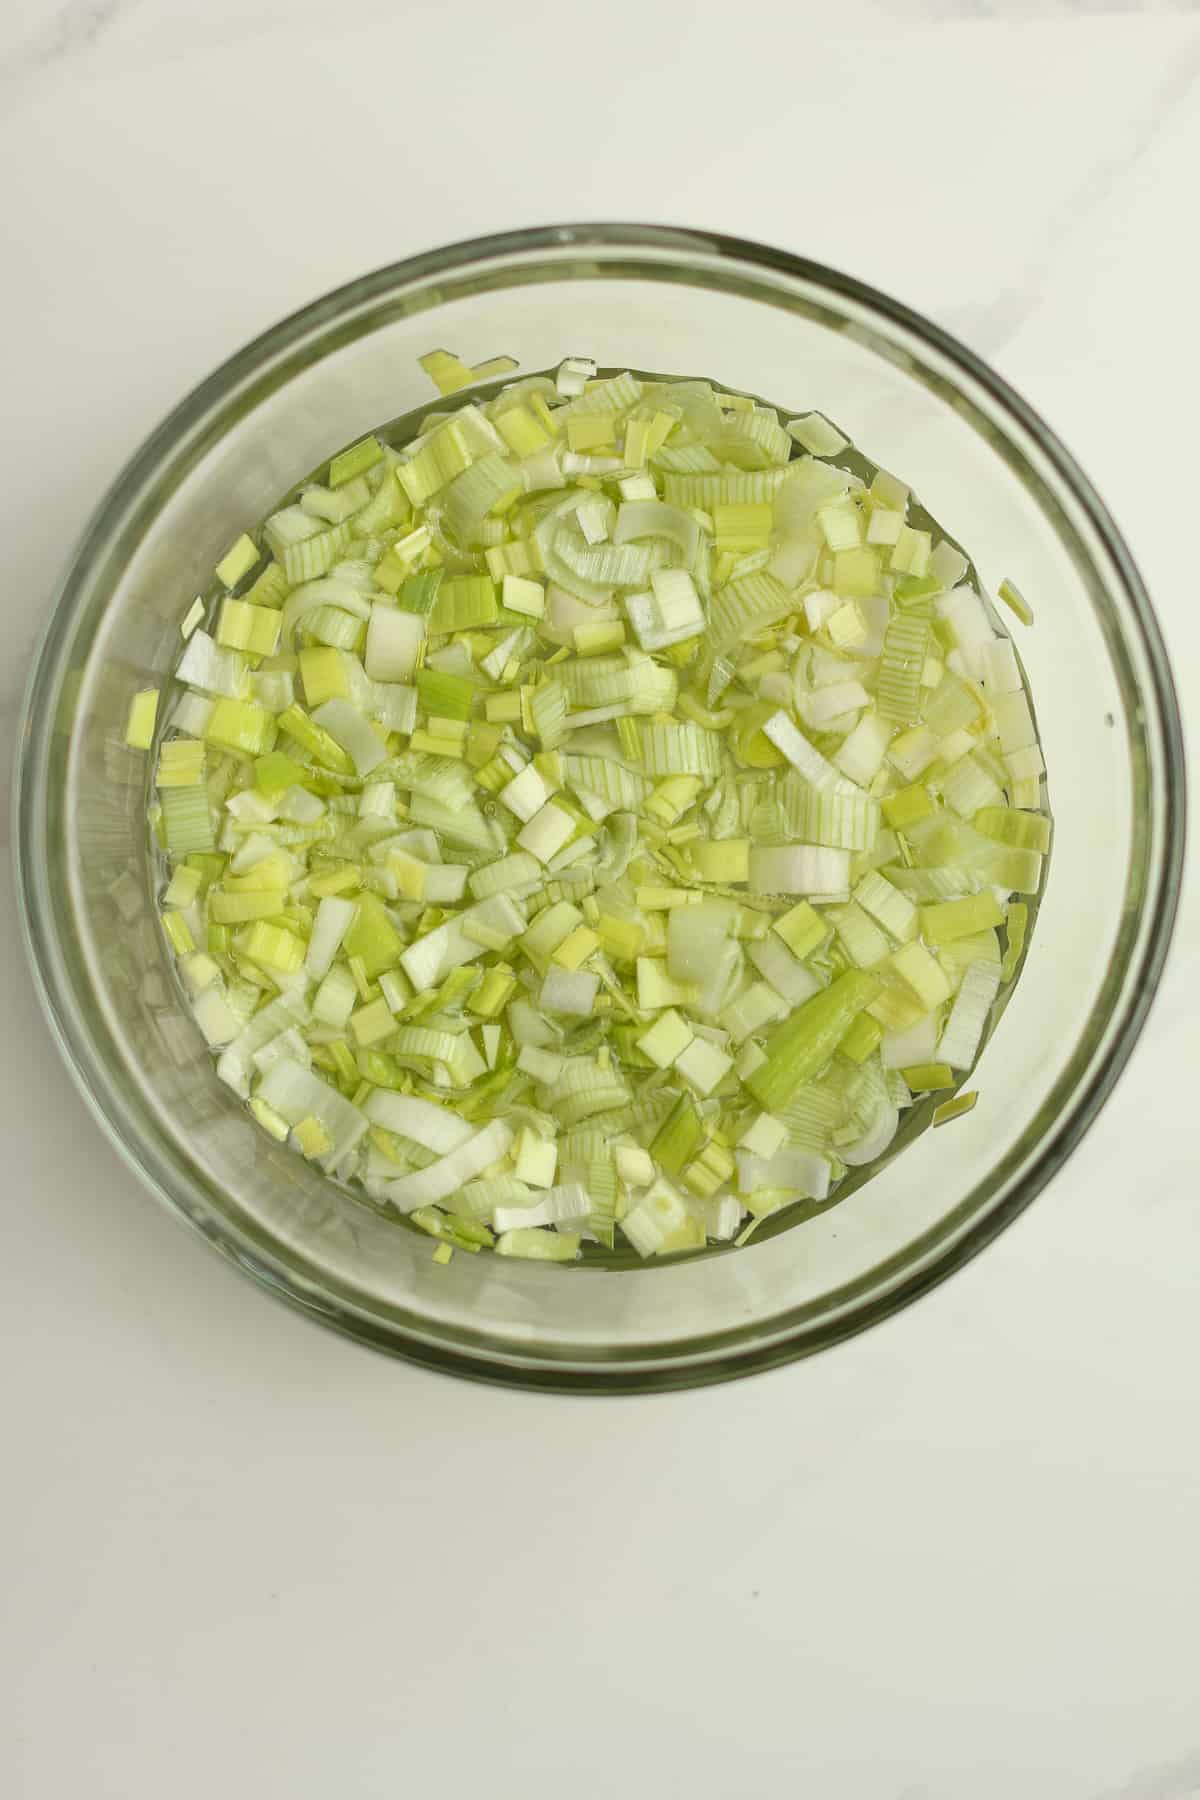 A bowl of the diced leek in water.